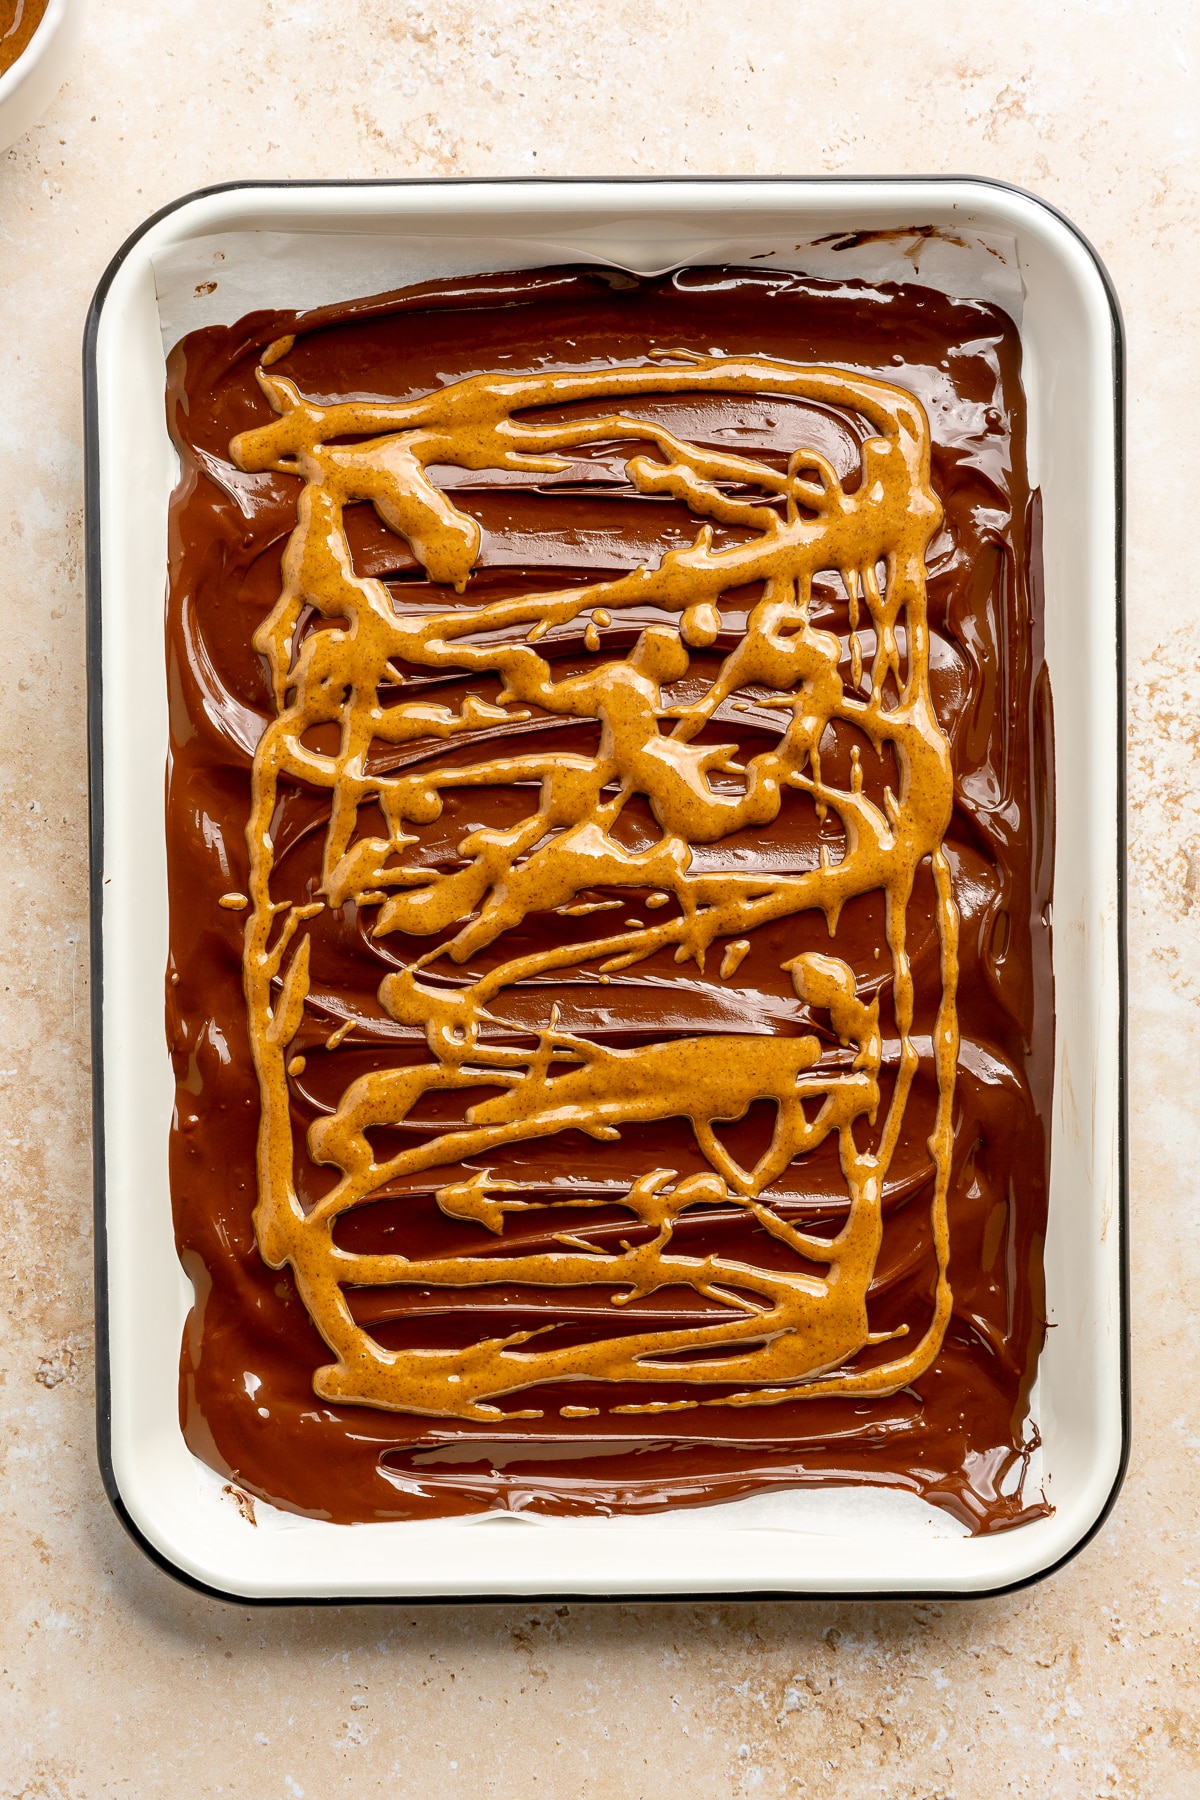 Peanut butter has been drizzled over the top of the chocolate layer.